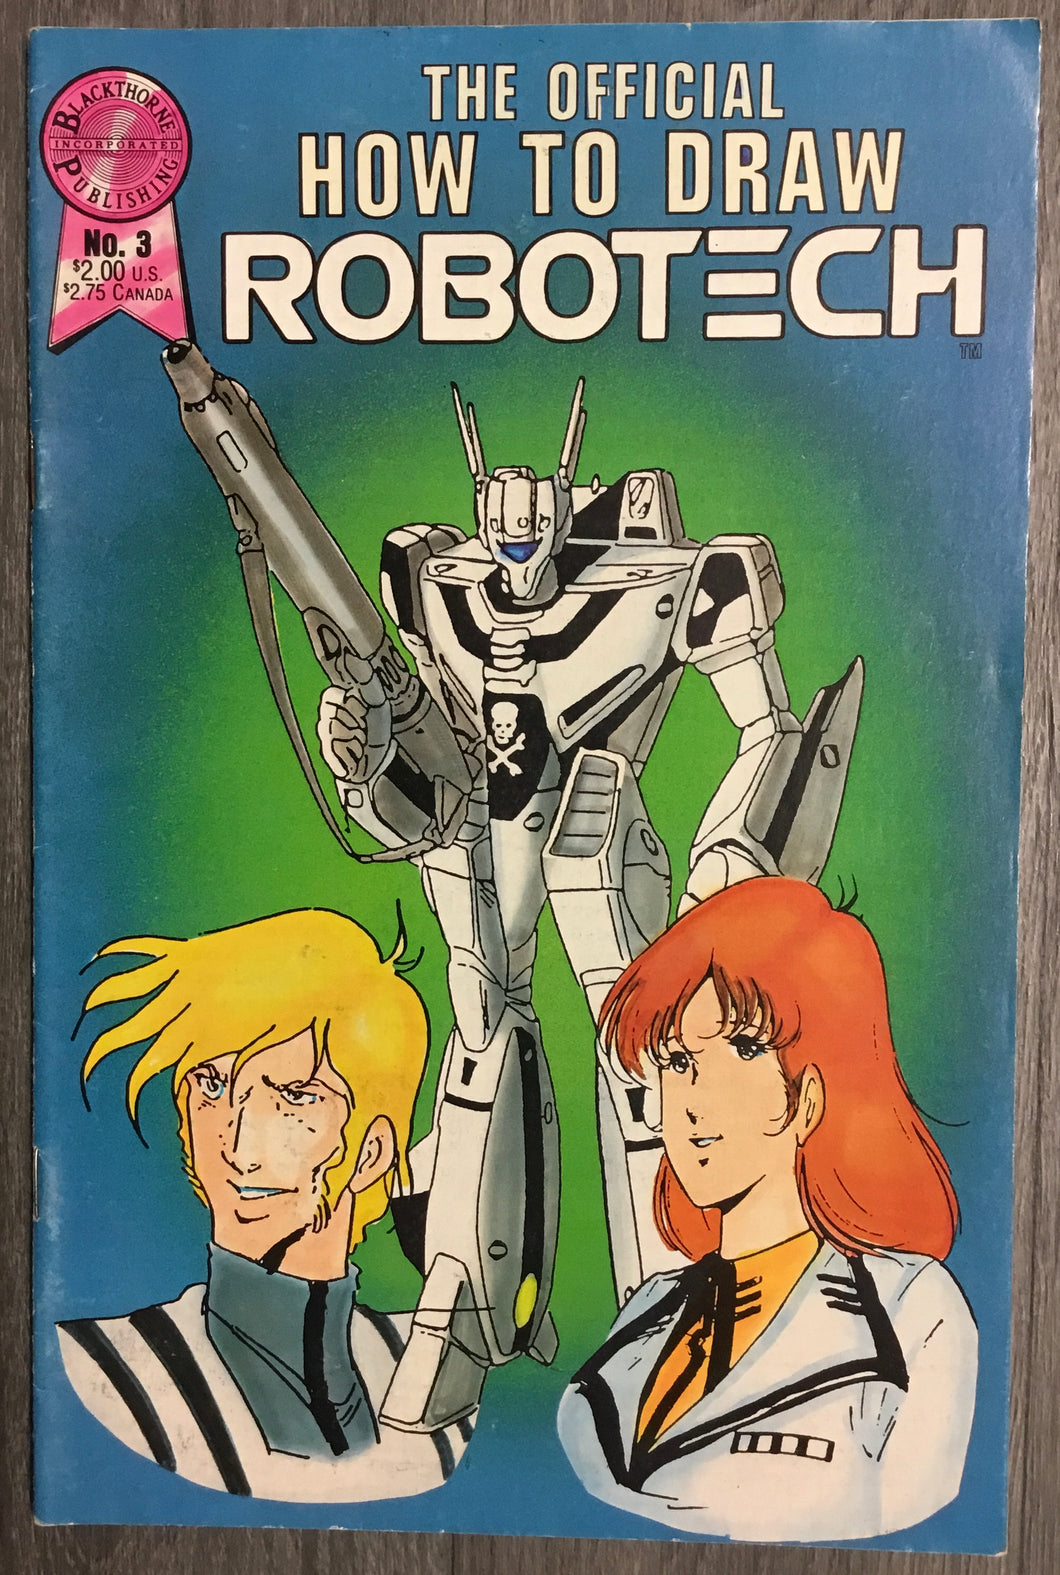 The Official How to Draw Robotech No. #3 1987 Blackthorne Publishing